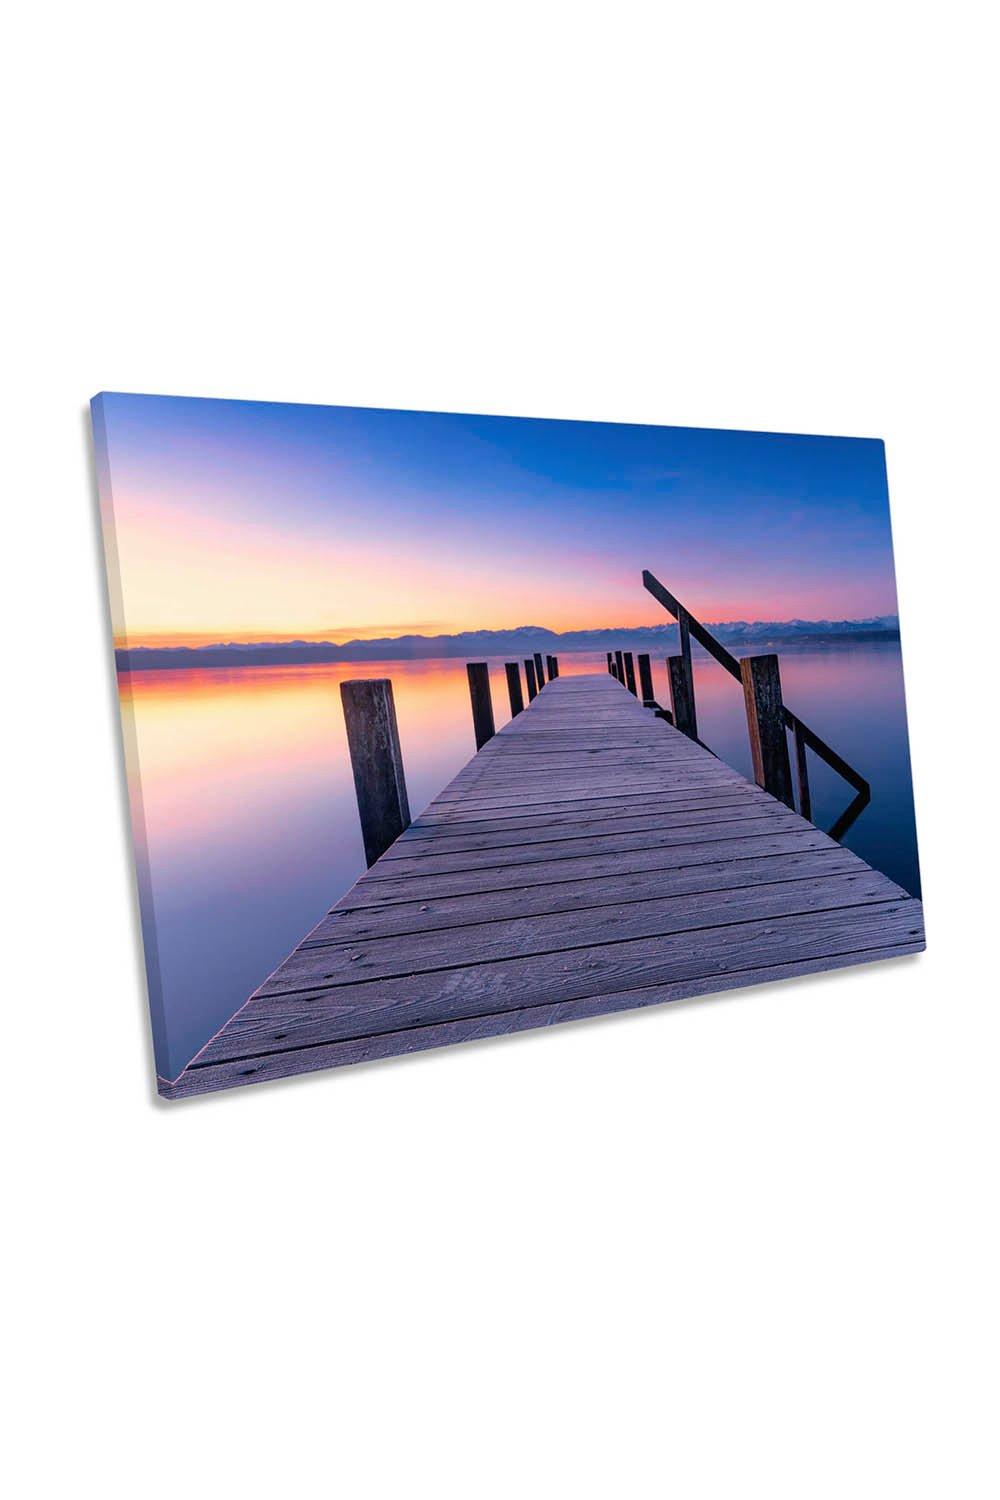 At the Lake Pier Jetty Seascape Pink Sunset Canvas Wall Art Picture Print